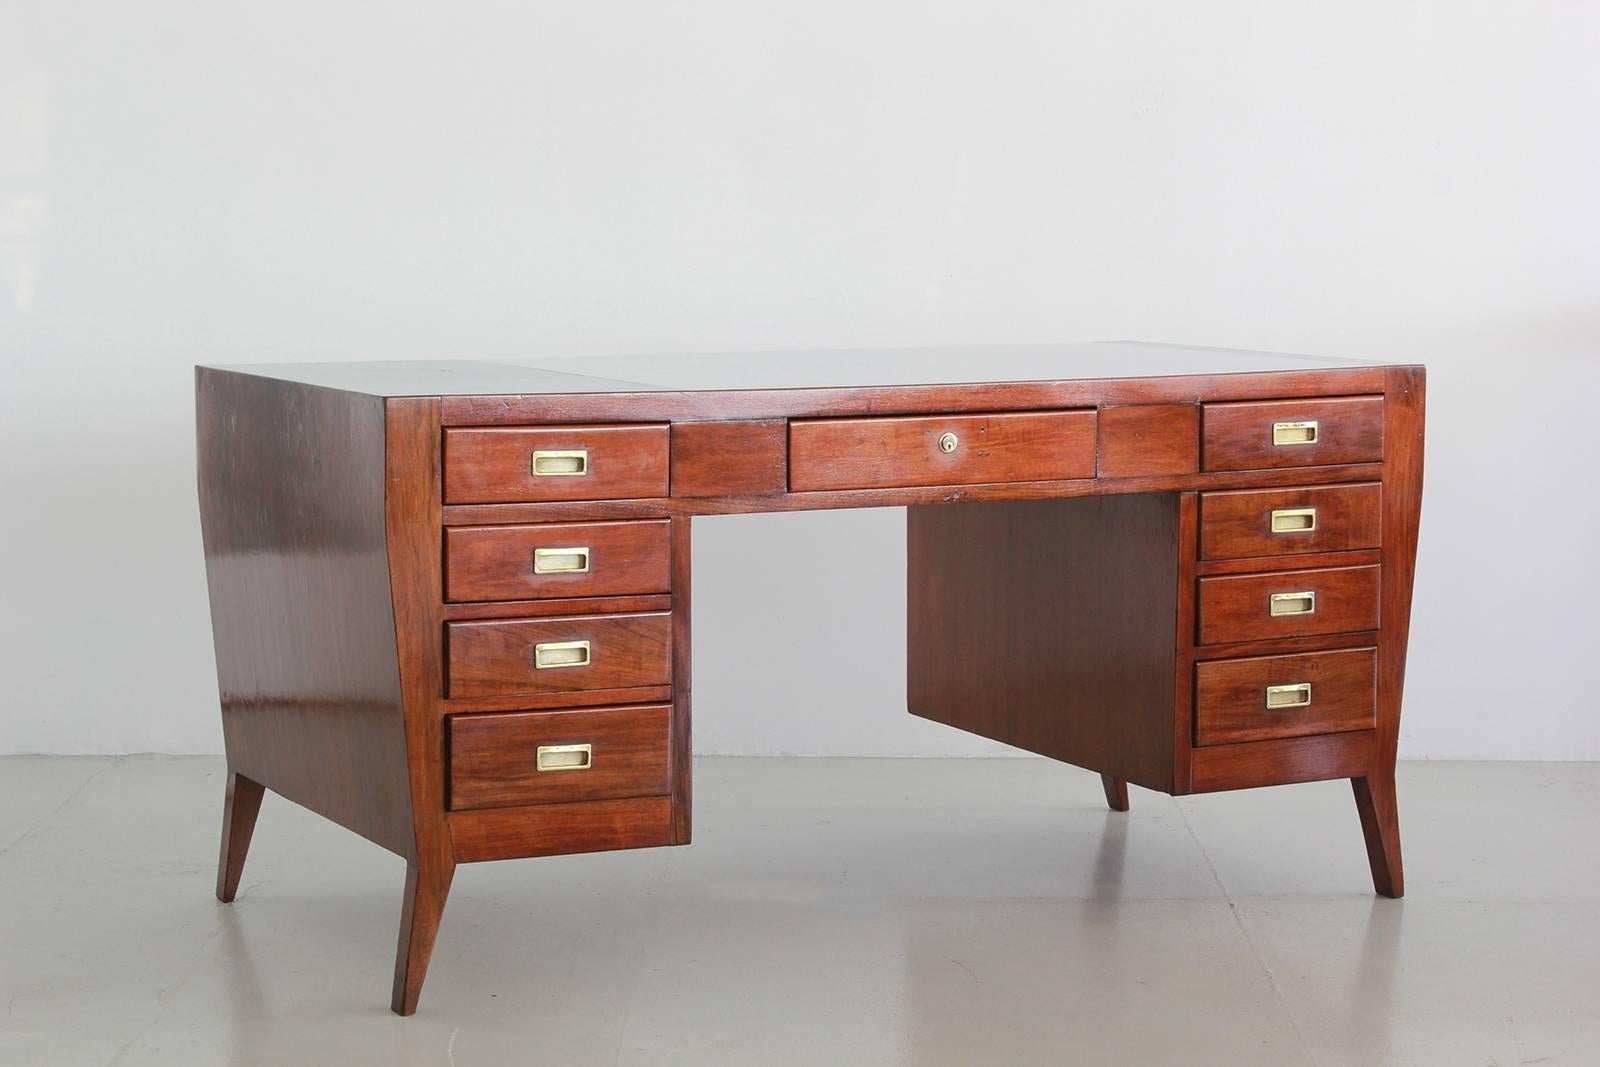 Gio Ponti designed desk for the National Labor Office.
Beautifully refinished walnut with polished brass hardware.
Top is original formica in shades of blue.